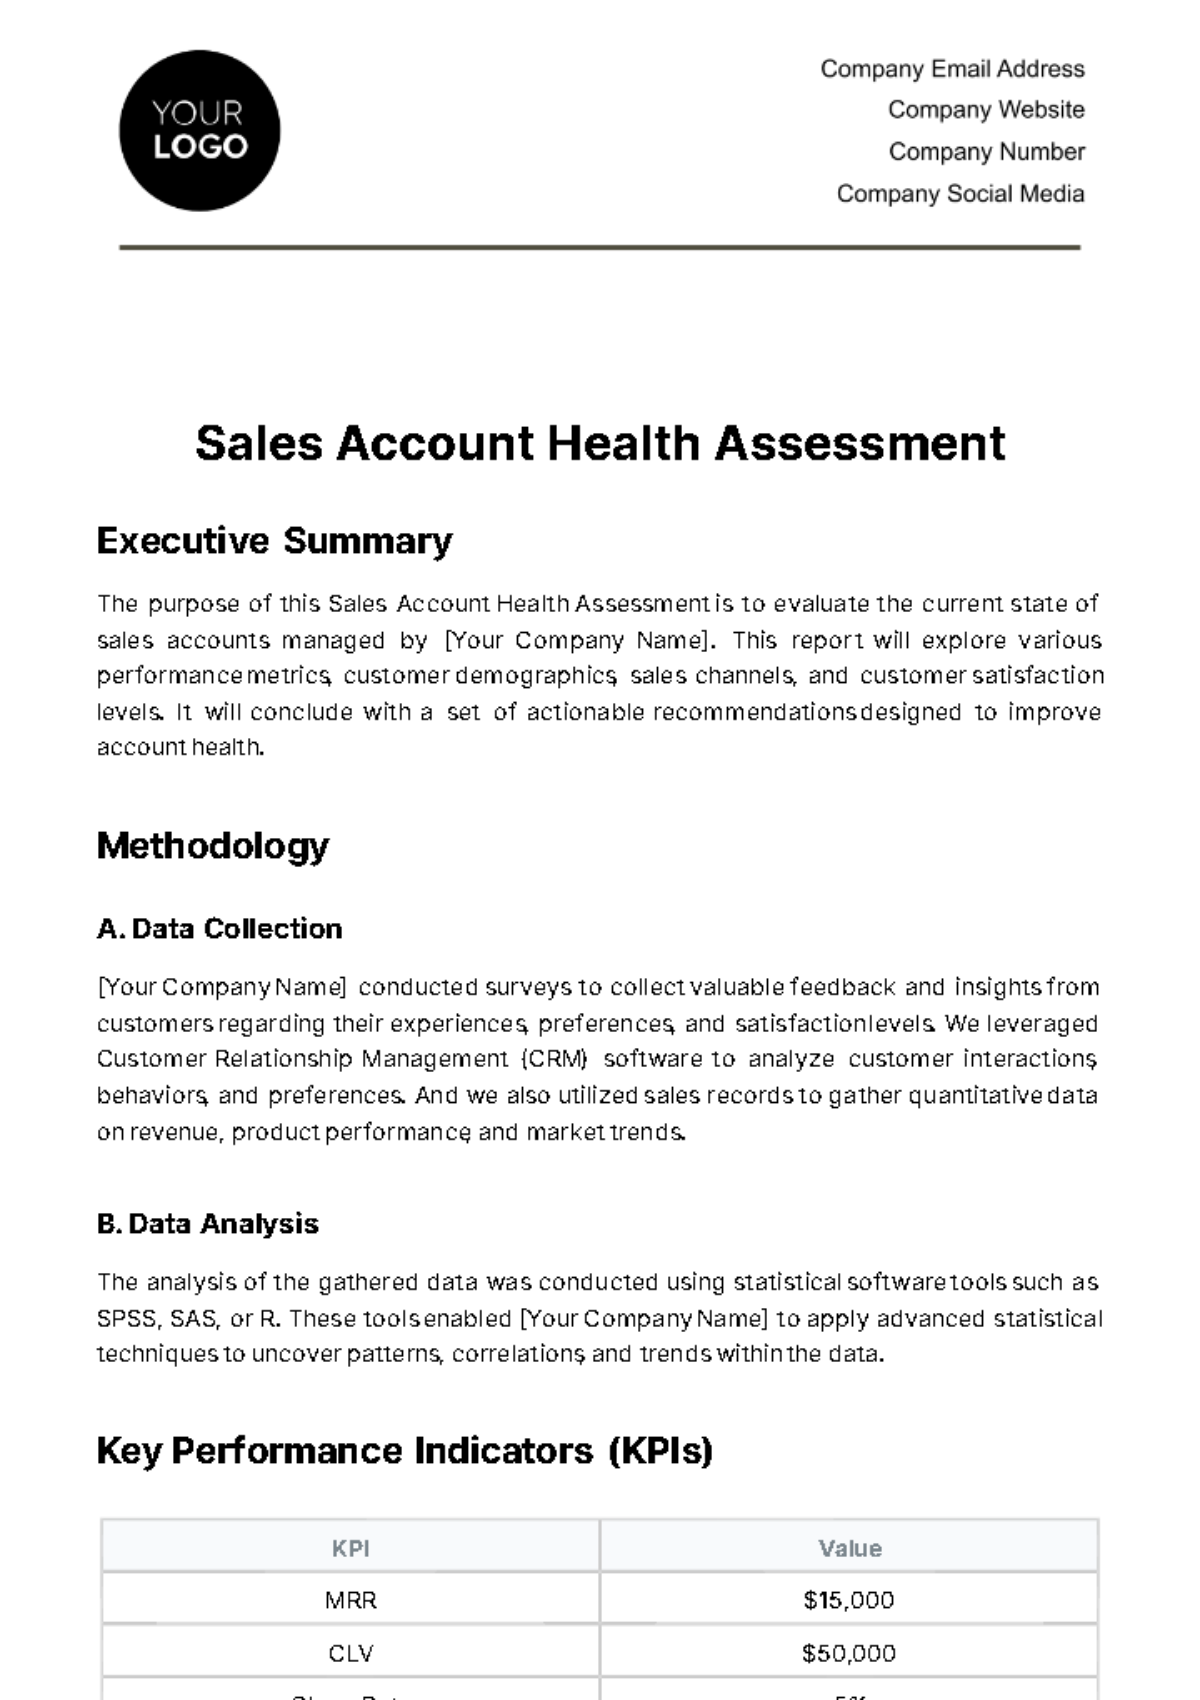 Sales Account Health Assessment Template